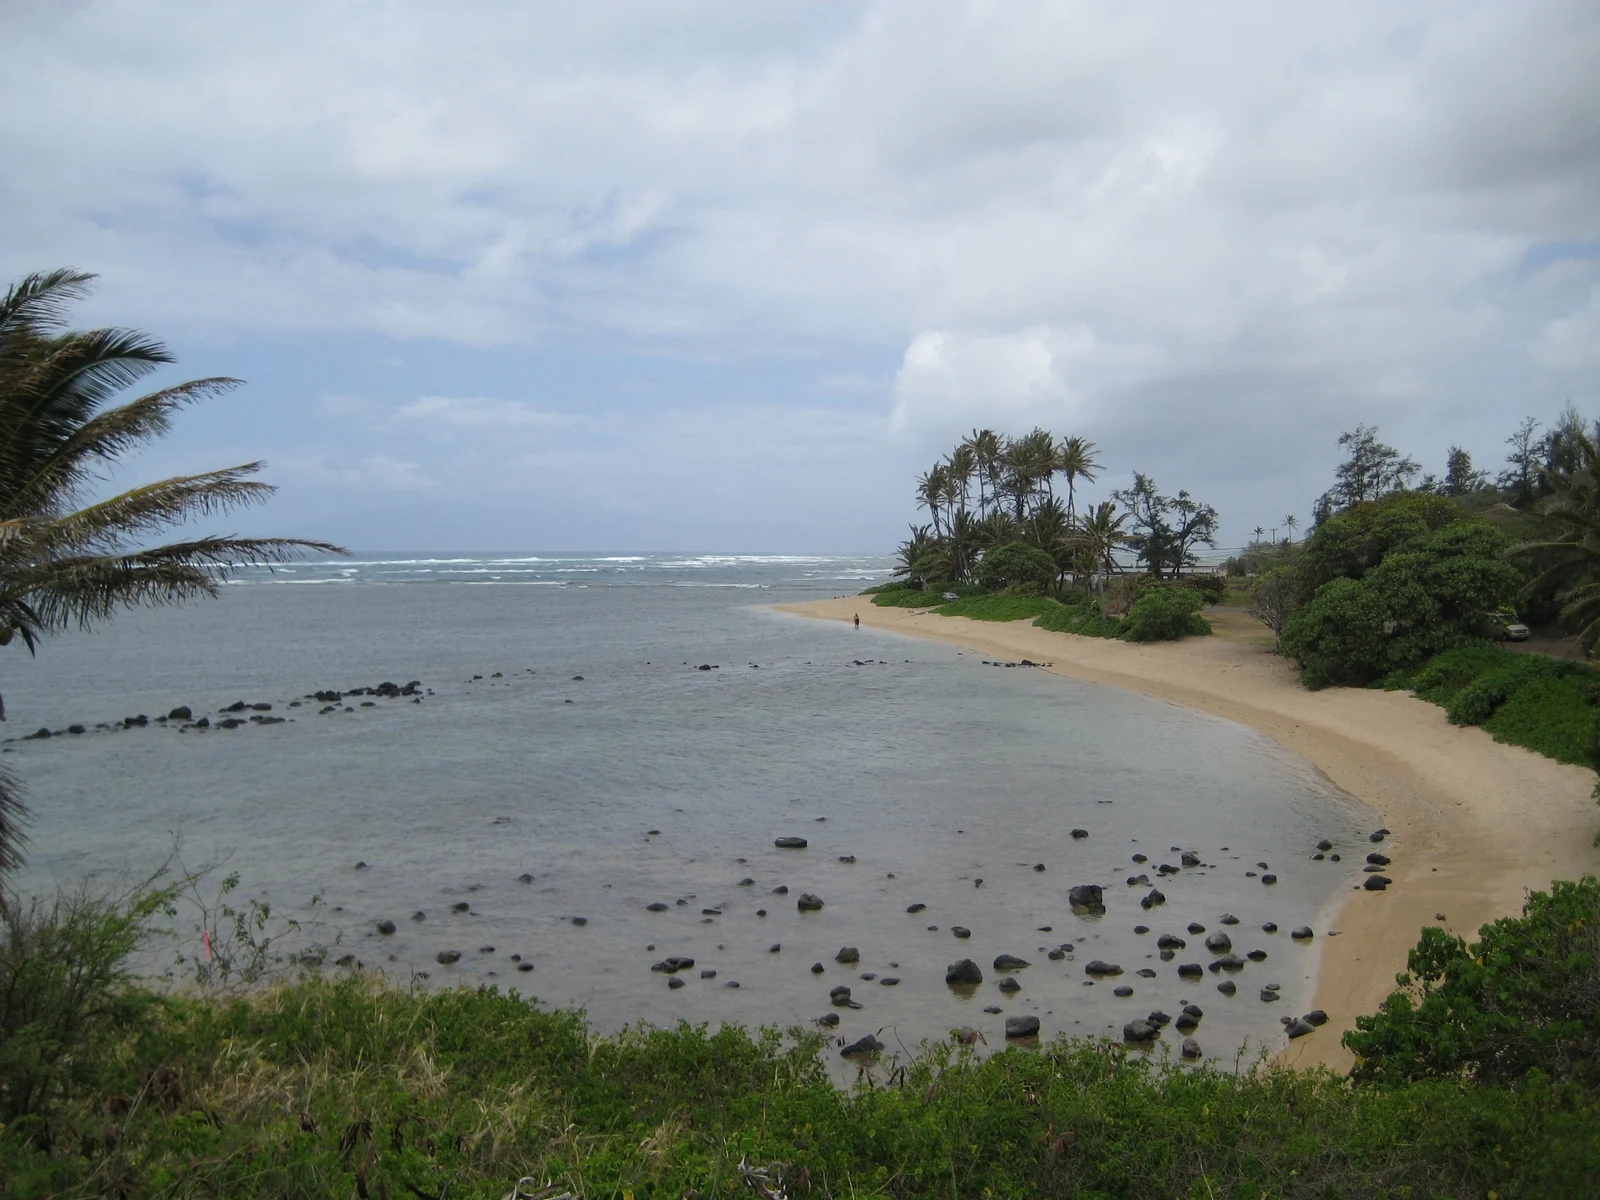 A person walking on the shallow and rocky beach line of Kumimi Beach, also known as Murphy’s Beach, one of the best snorkeling spots in Hawaii